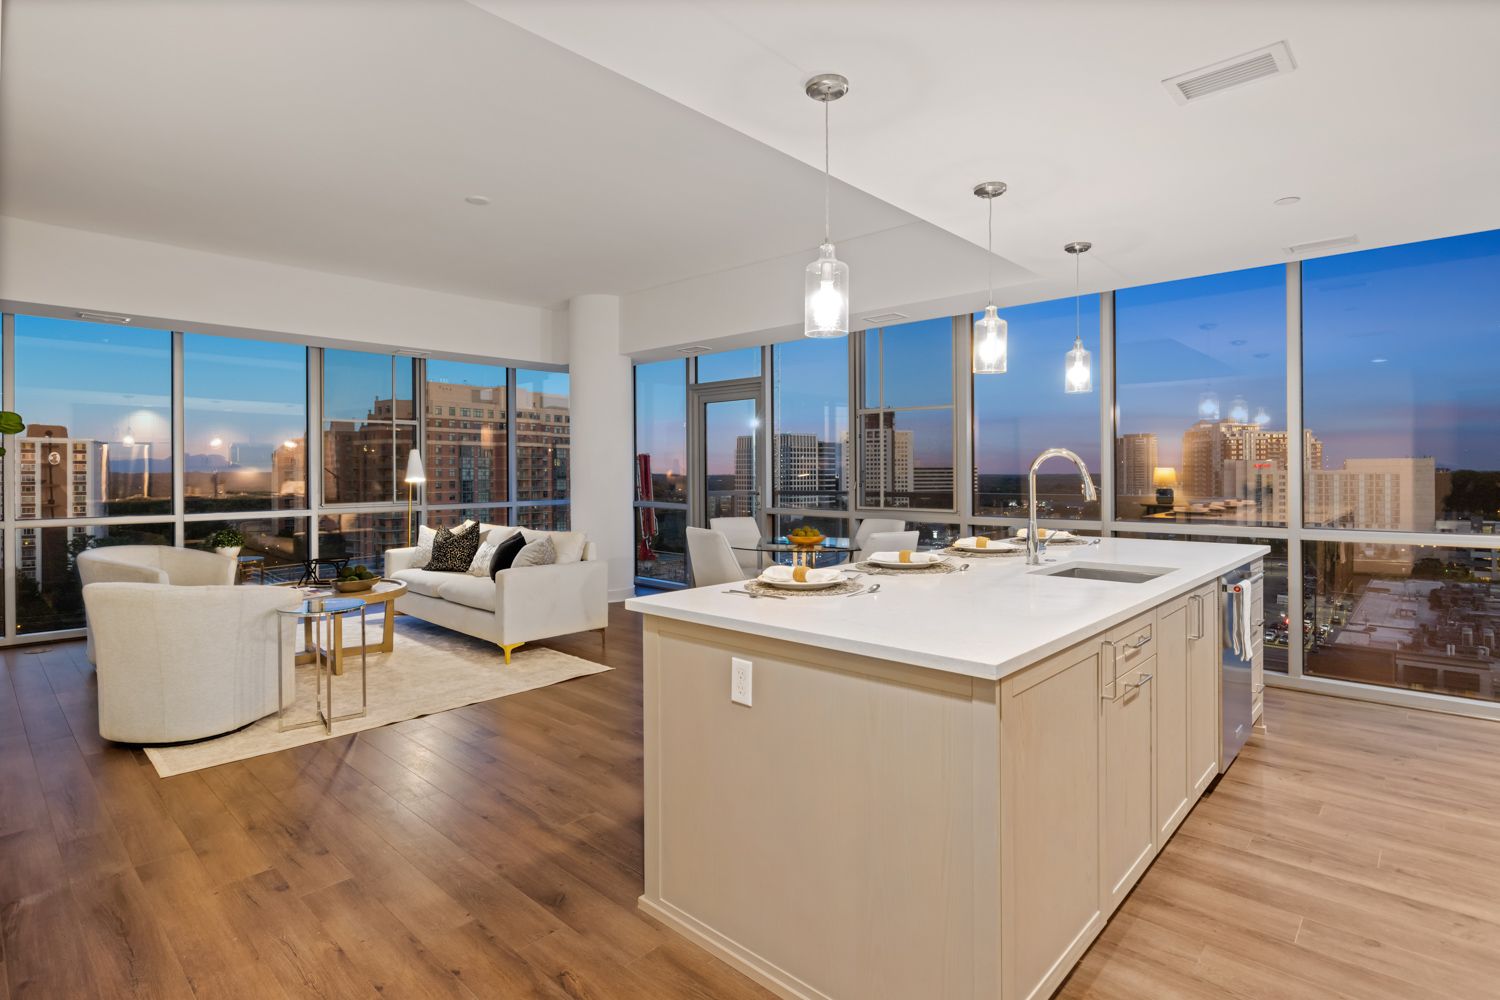 a living room and kitchen in a large apartment with lots of windows Apartment overlooking city - Twilight shoot by Craig Westerman